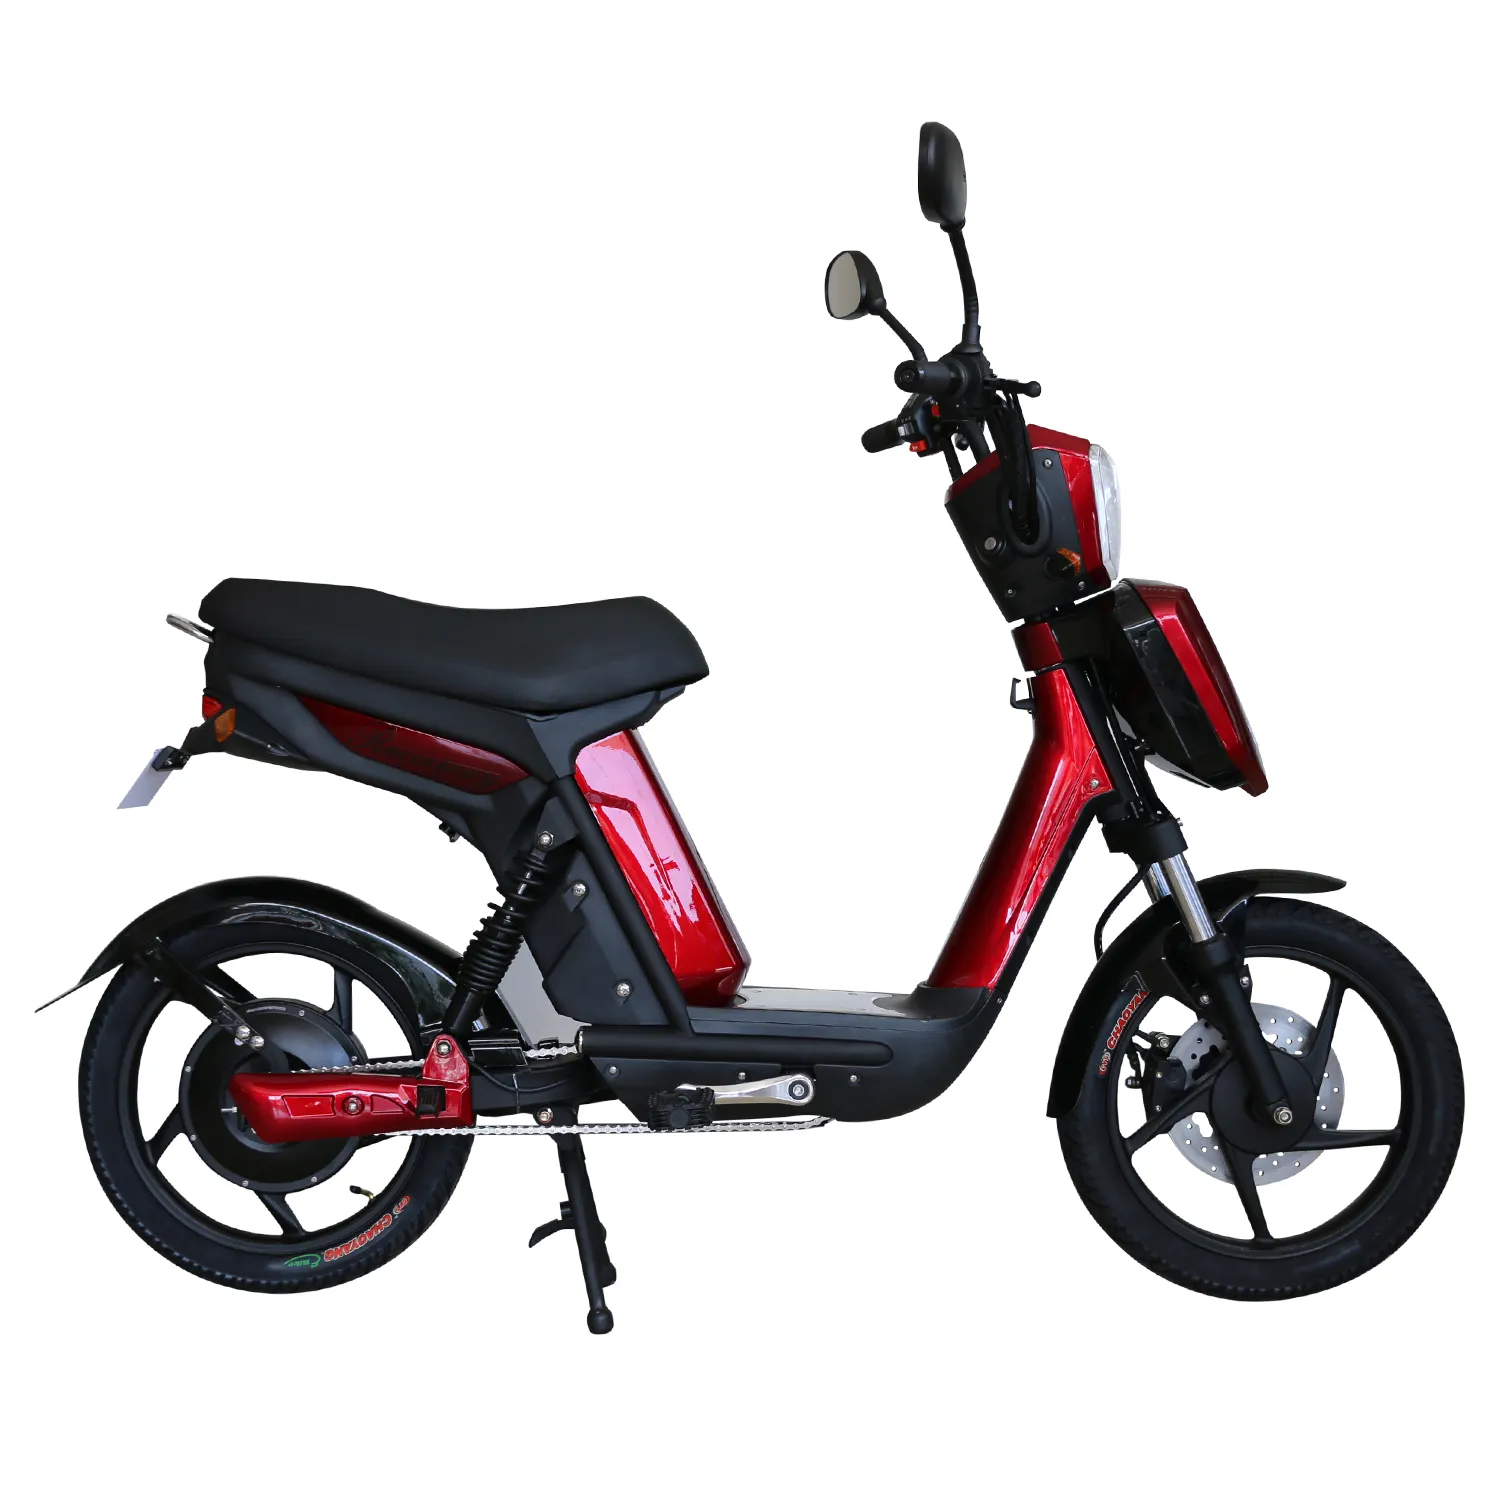 new design classic design powerful electric motorcycle factory direct sales 48v electric scooter 250W 500W electric motorcycle